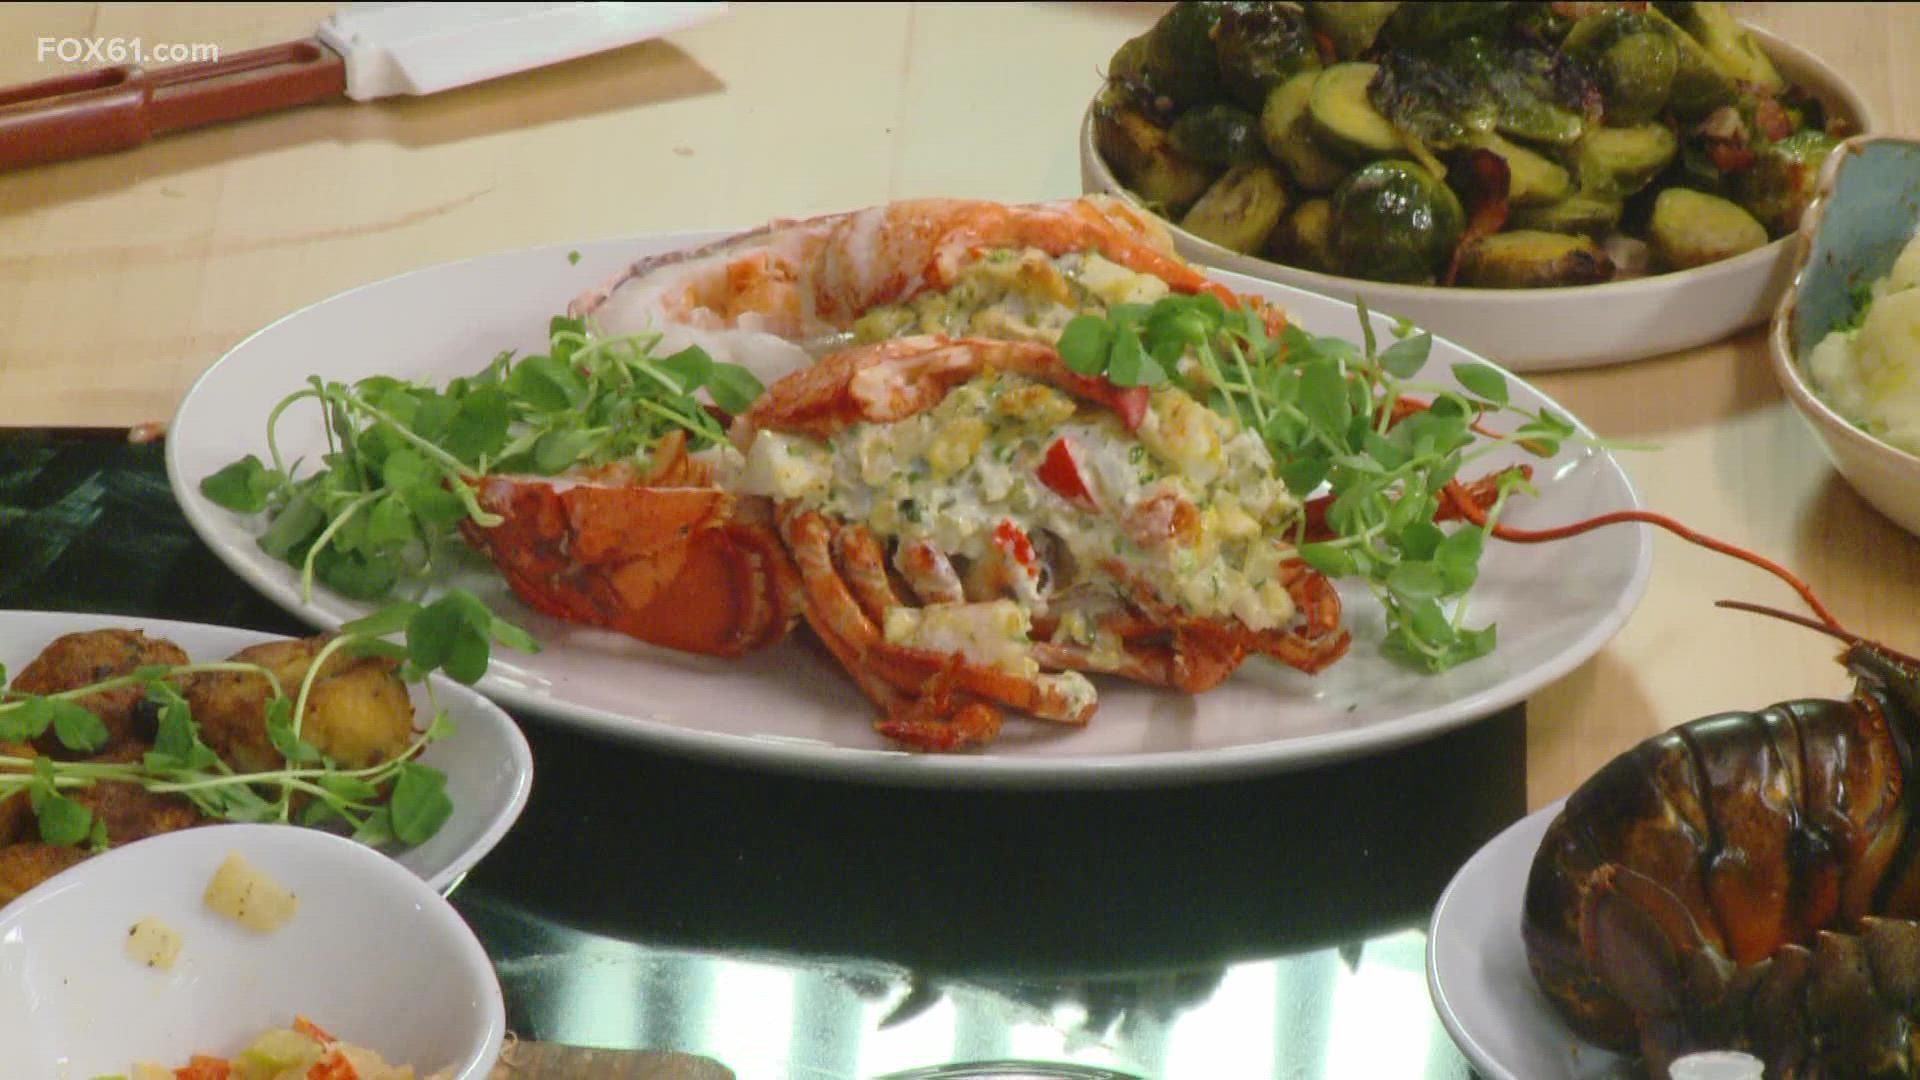 Chef Hunter Morton with the Max Restaurant Group showcases this tasty lobster recipe.